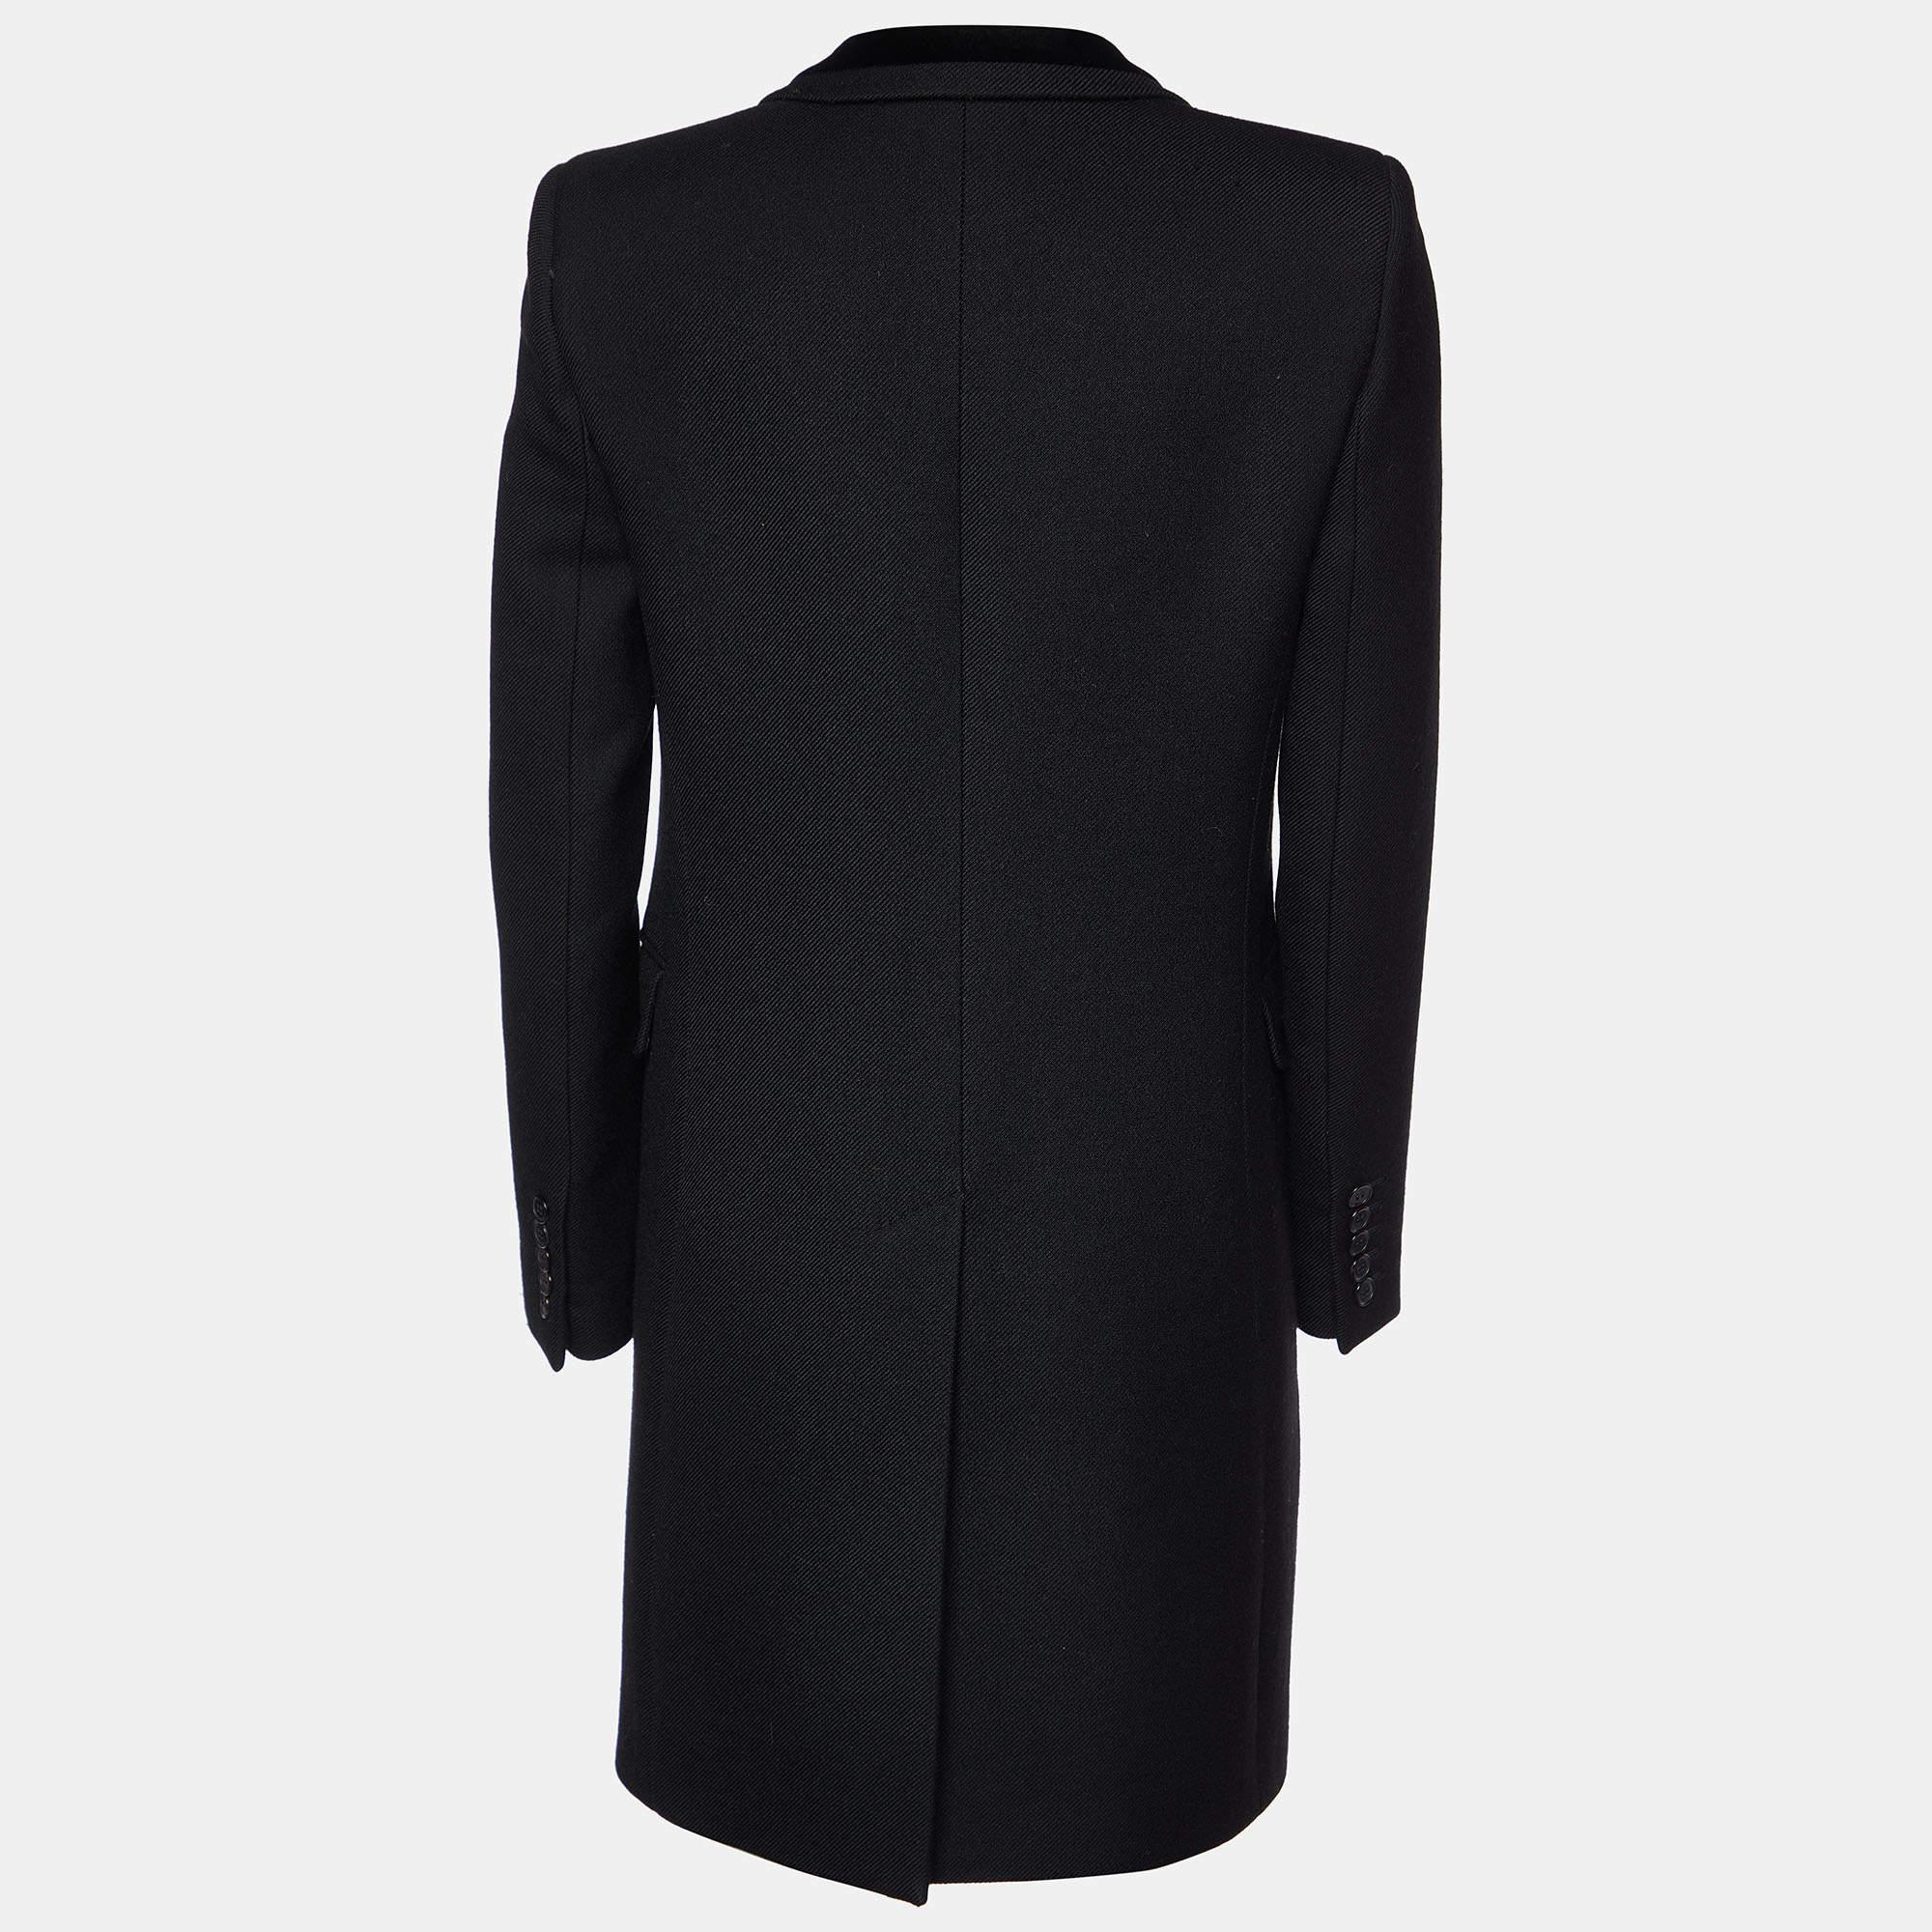 Crafted from luxurious black wool, this Saint Laurent mid-length coat exudes timeless style and sophistication. Its tailored silhouette flatters the figure, while the classic lapel collar and button closure add a refined touch. Perfect for chilly